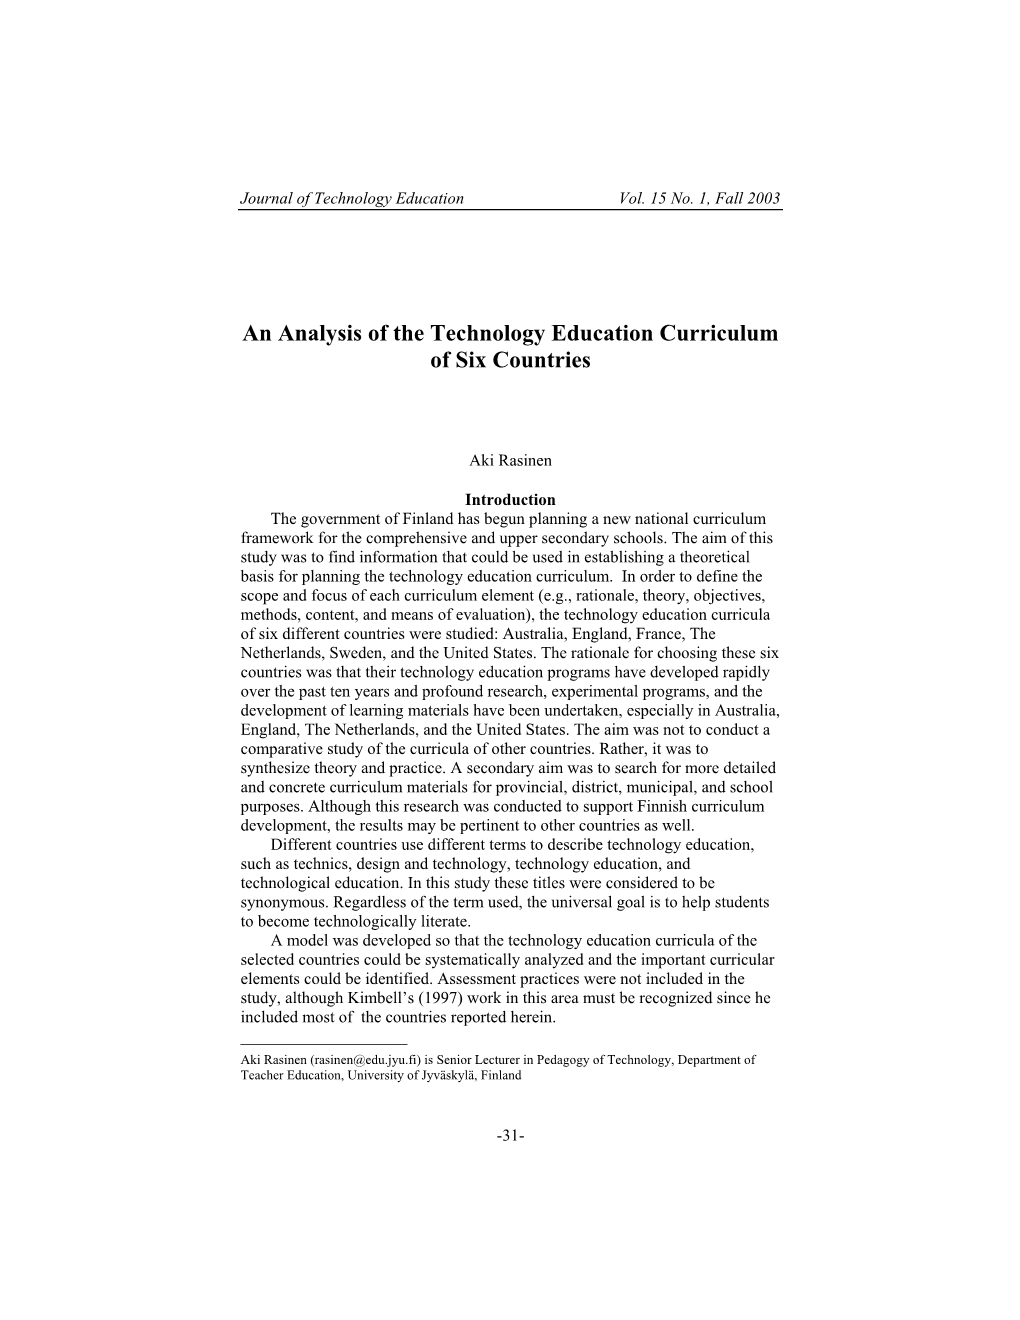 An Analysis of the Technology Education Curriculum of Six Countries